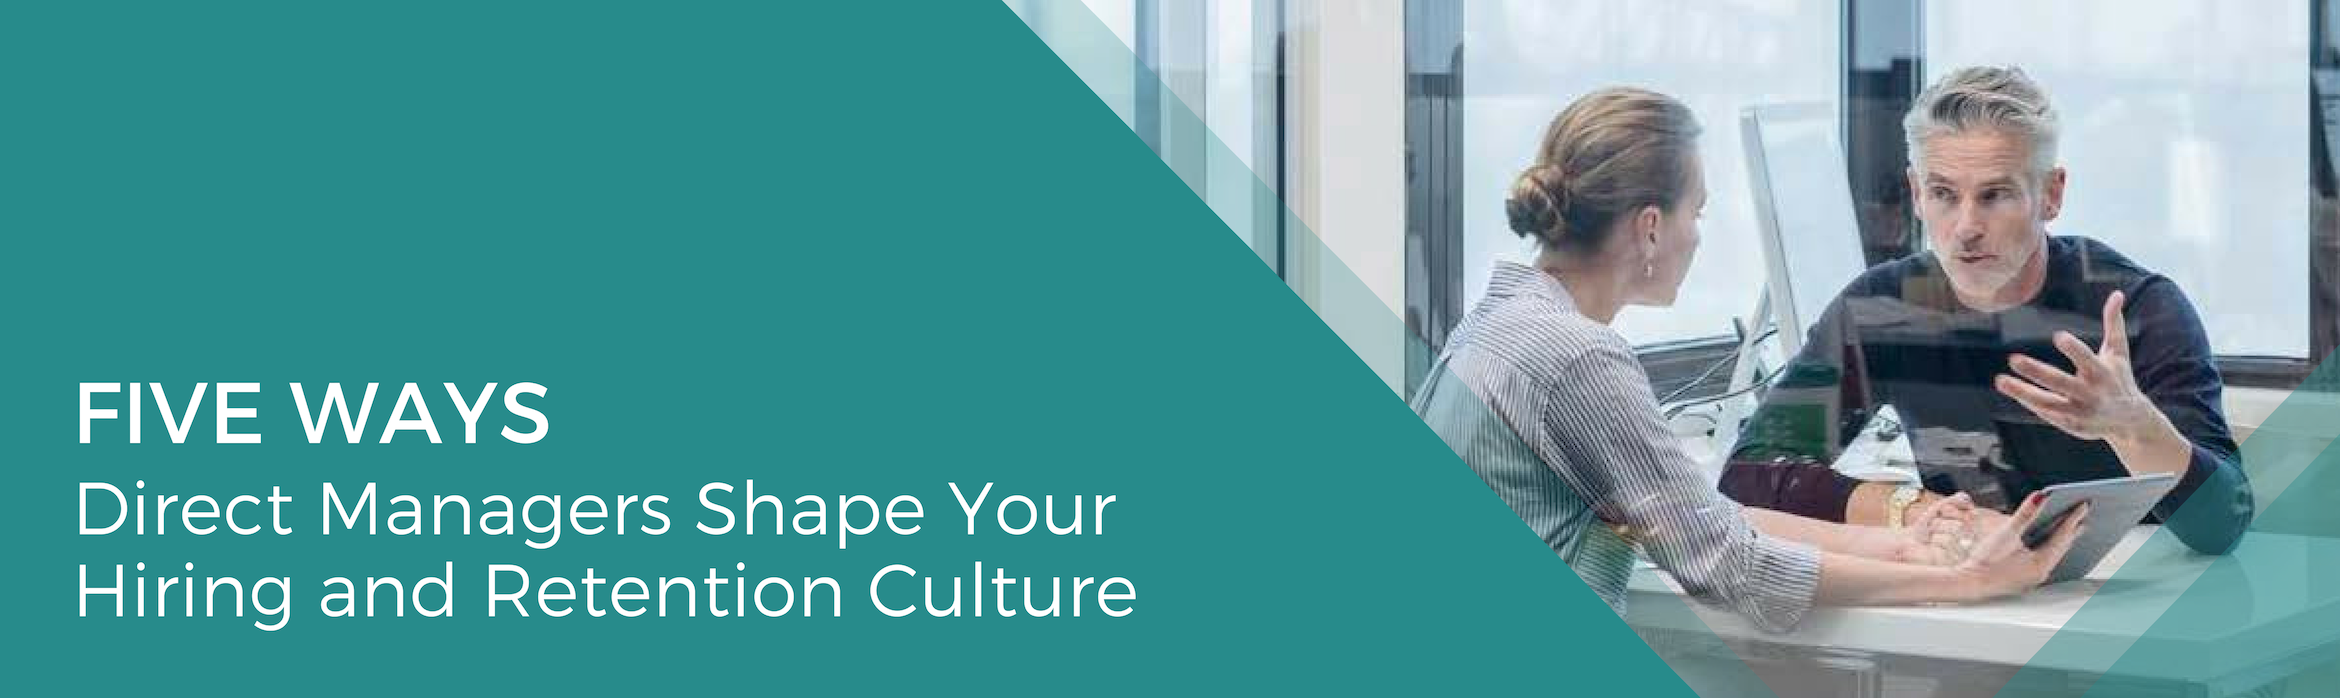 5 Ways Direct Managers Shape Your Hiring and Retention Culture